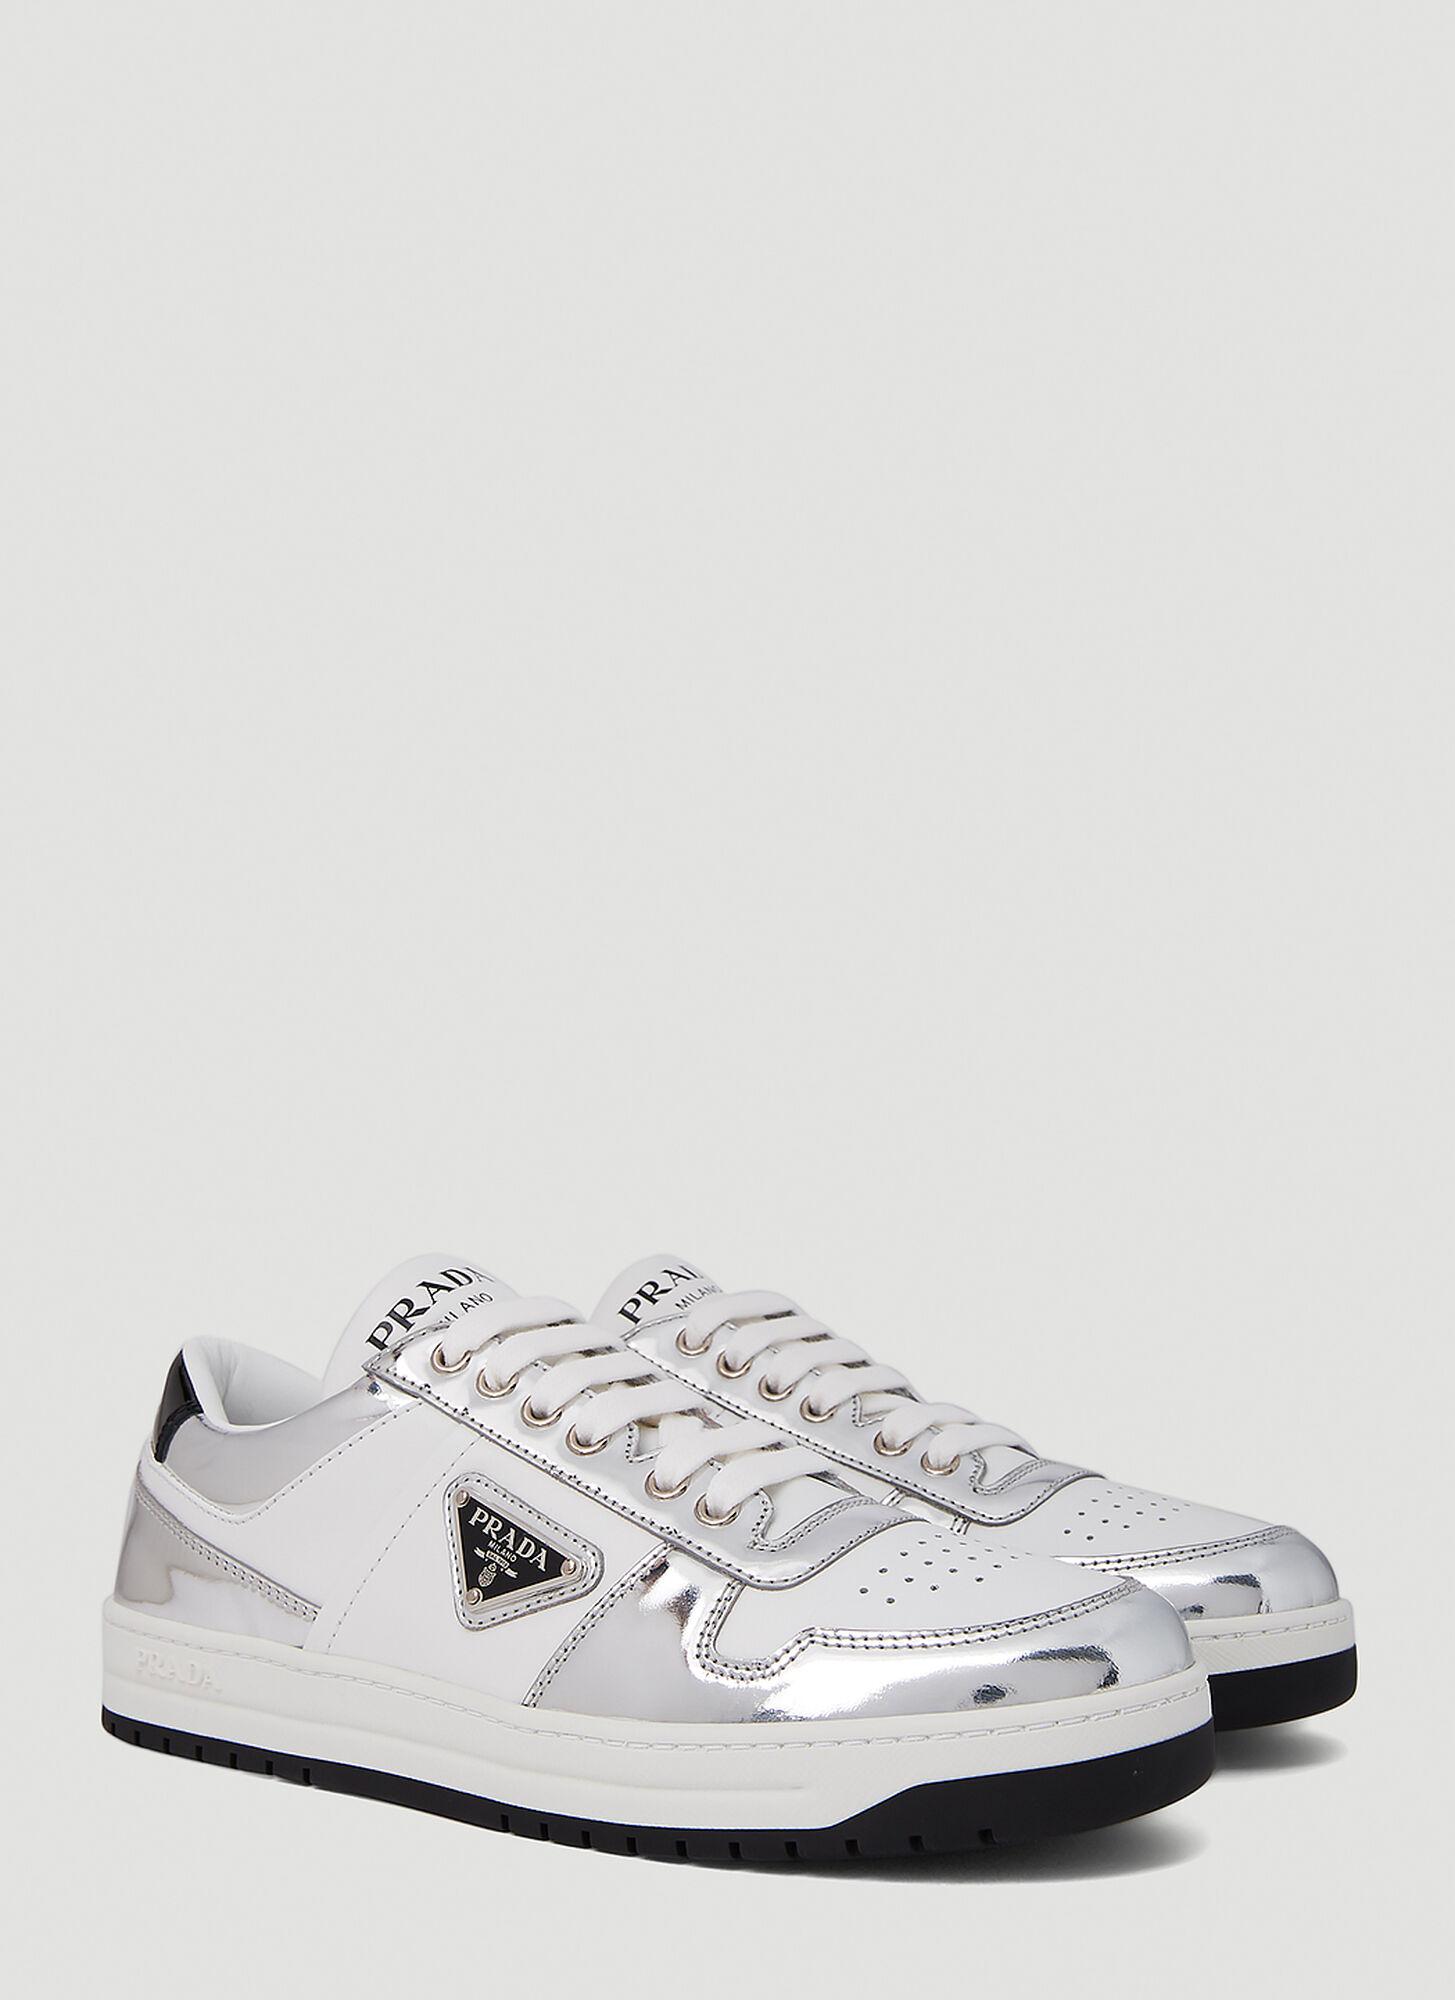 Prada Mirrored Downtown Sneakers in White | Lyst